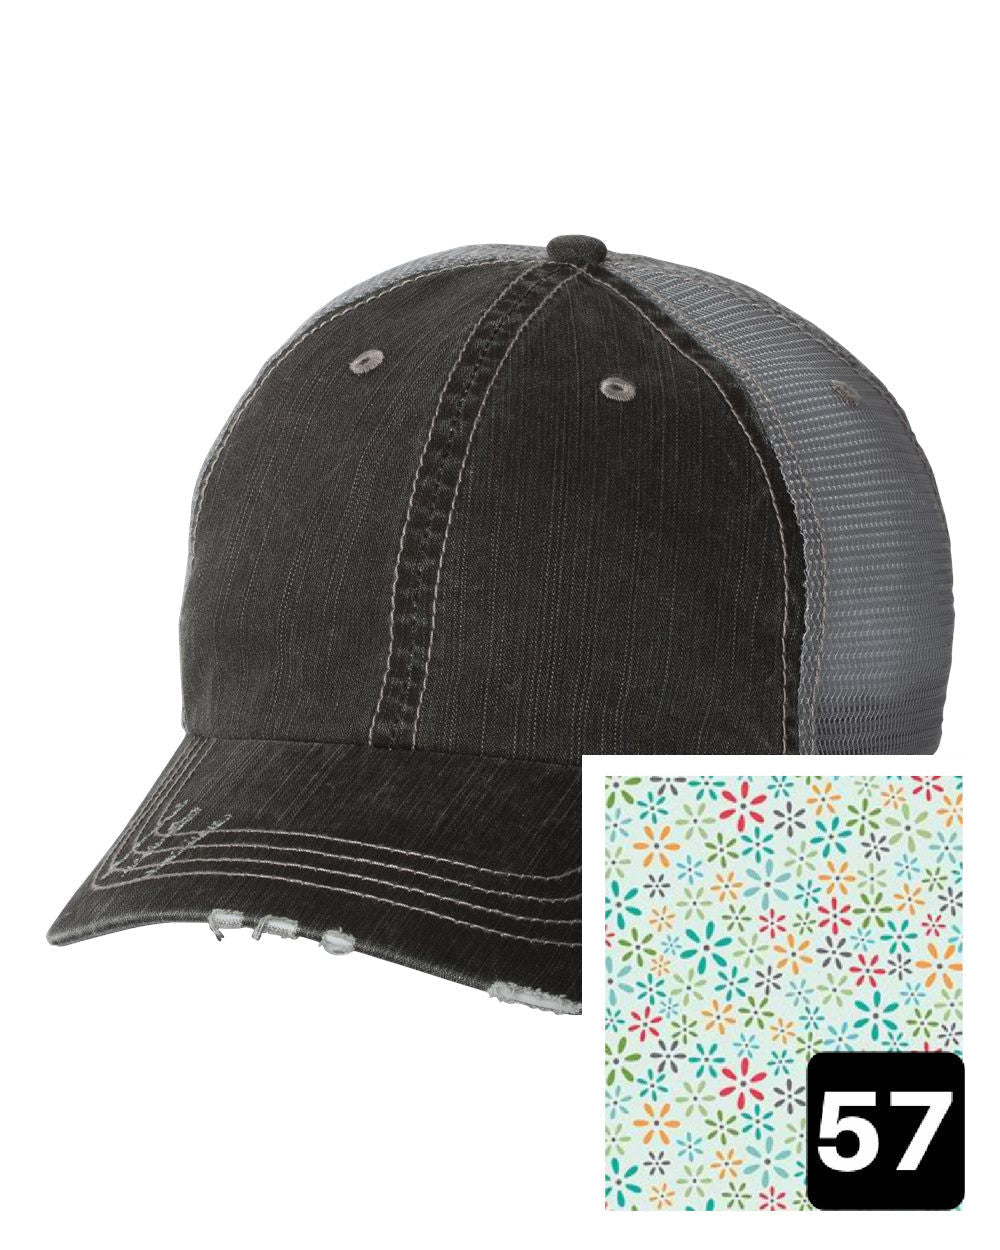 gray distressed trucker hat with white daisy on yellow fabric state of New Mexico